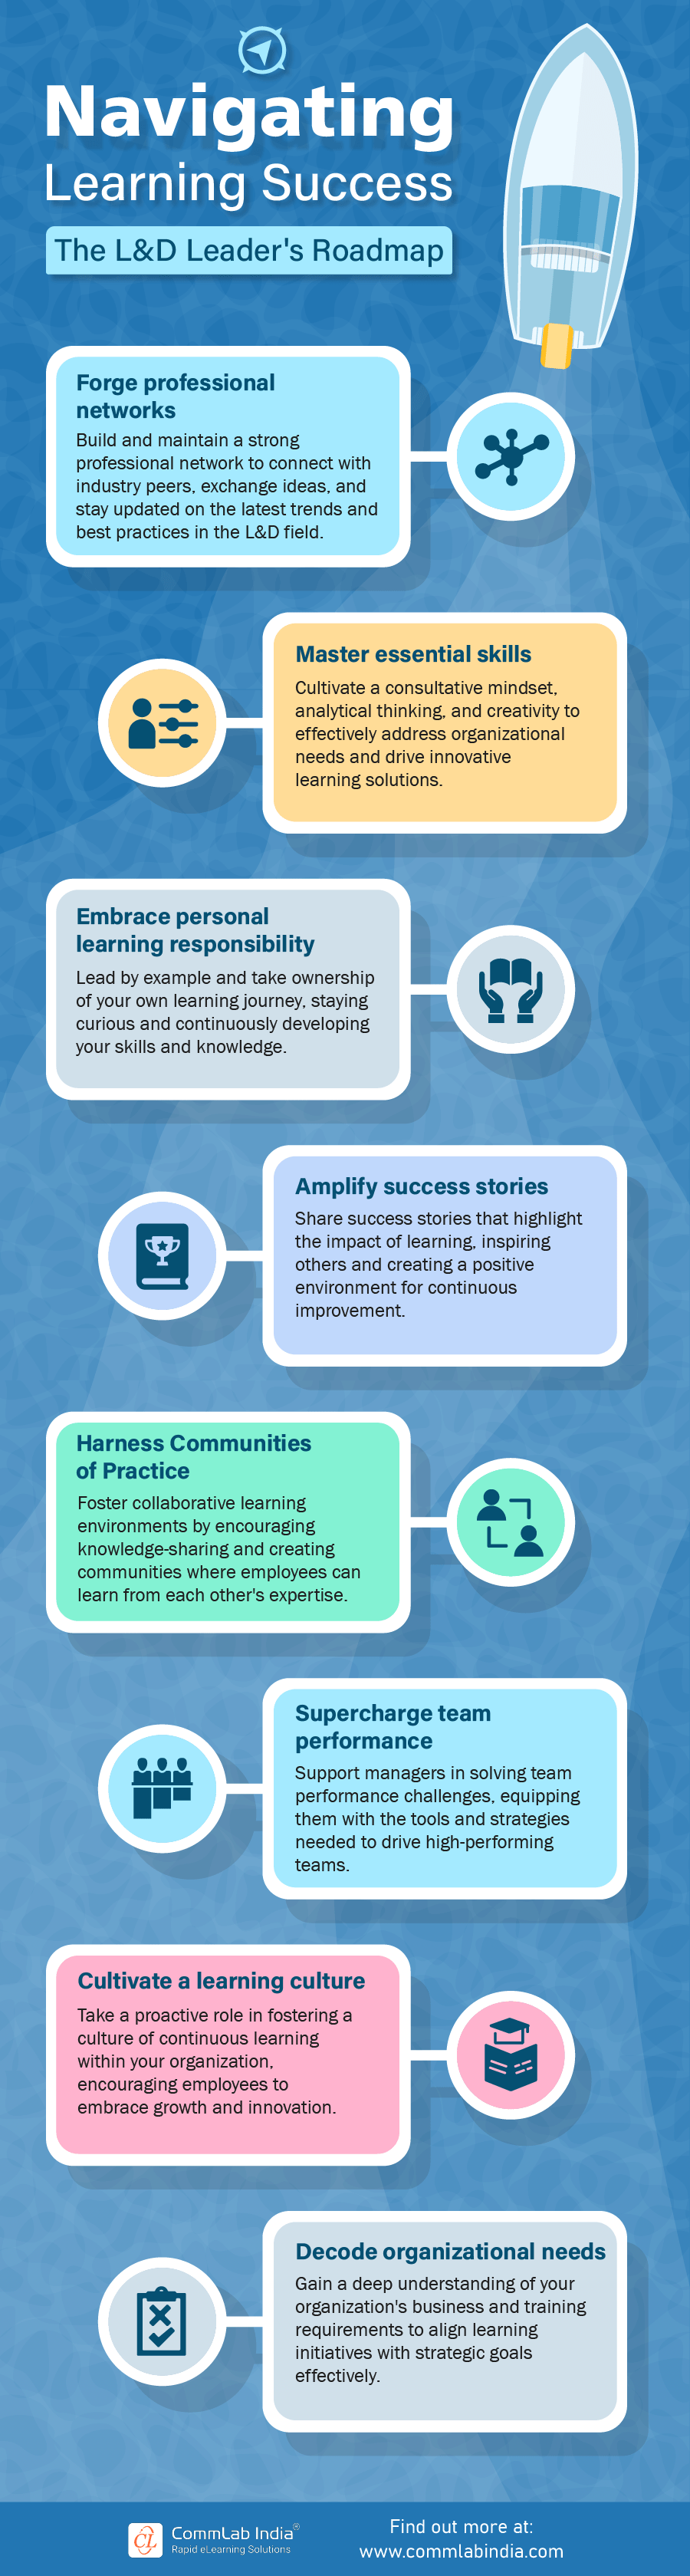 ld-roadmap-learning-success-infographic-info